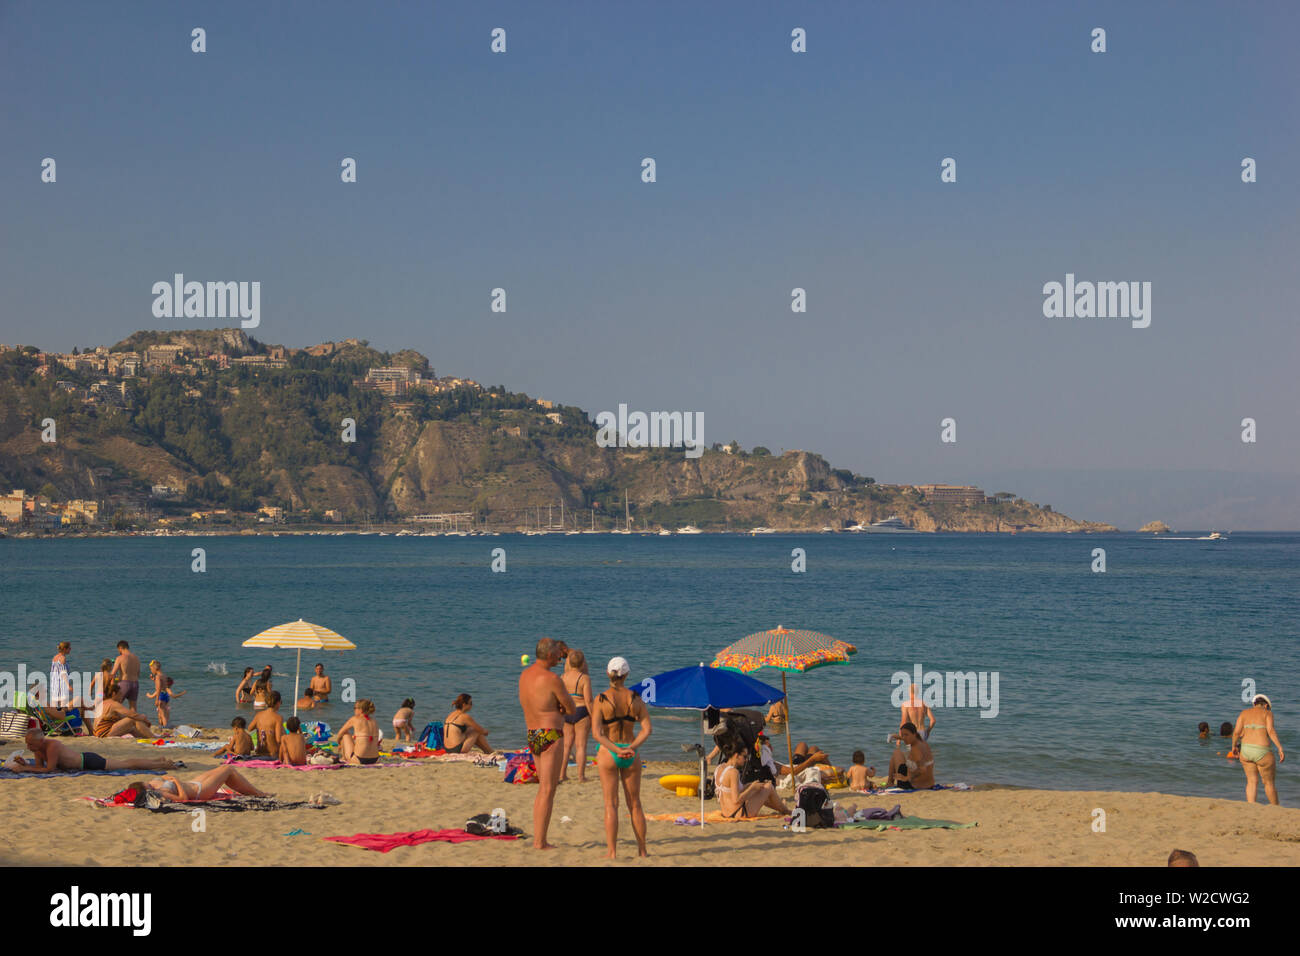 Giardini Naxos Sicily Italy 2019 beautiful view of the beach and people enjoying the sea and far in background the mountains of Taormina and bay Stock Photo